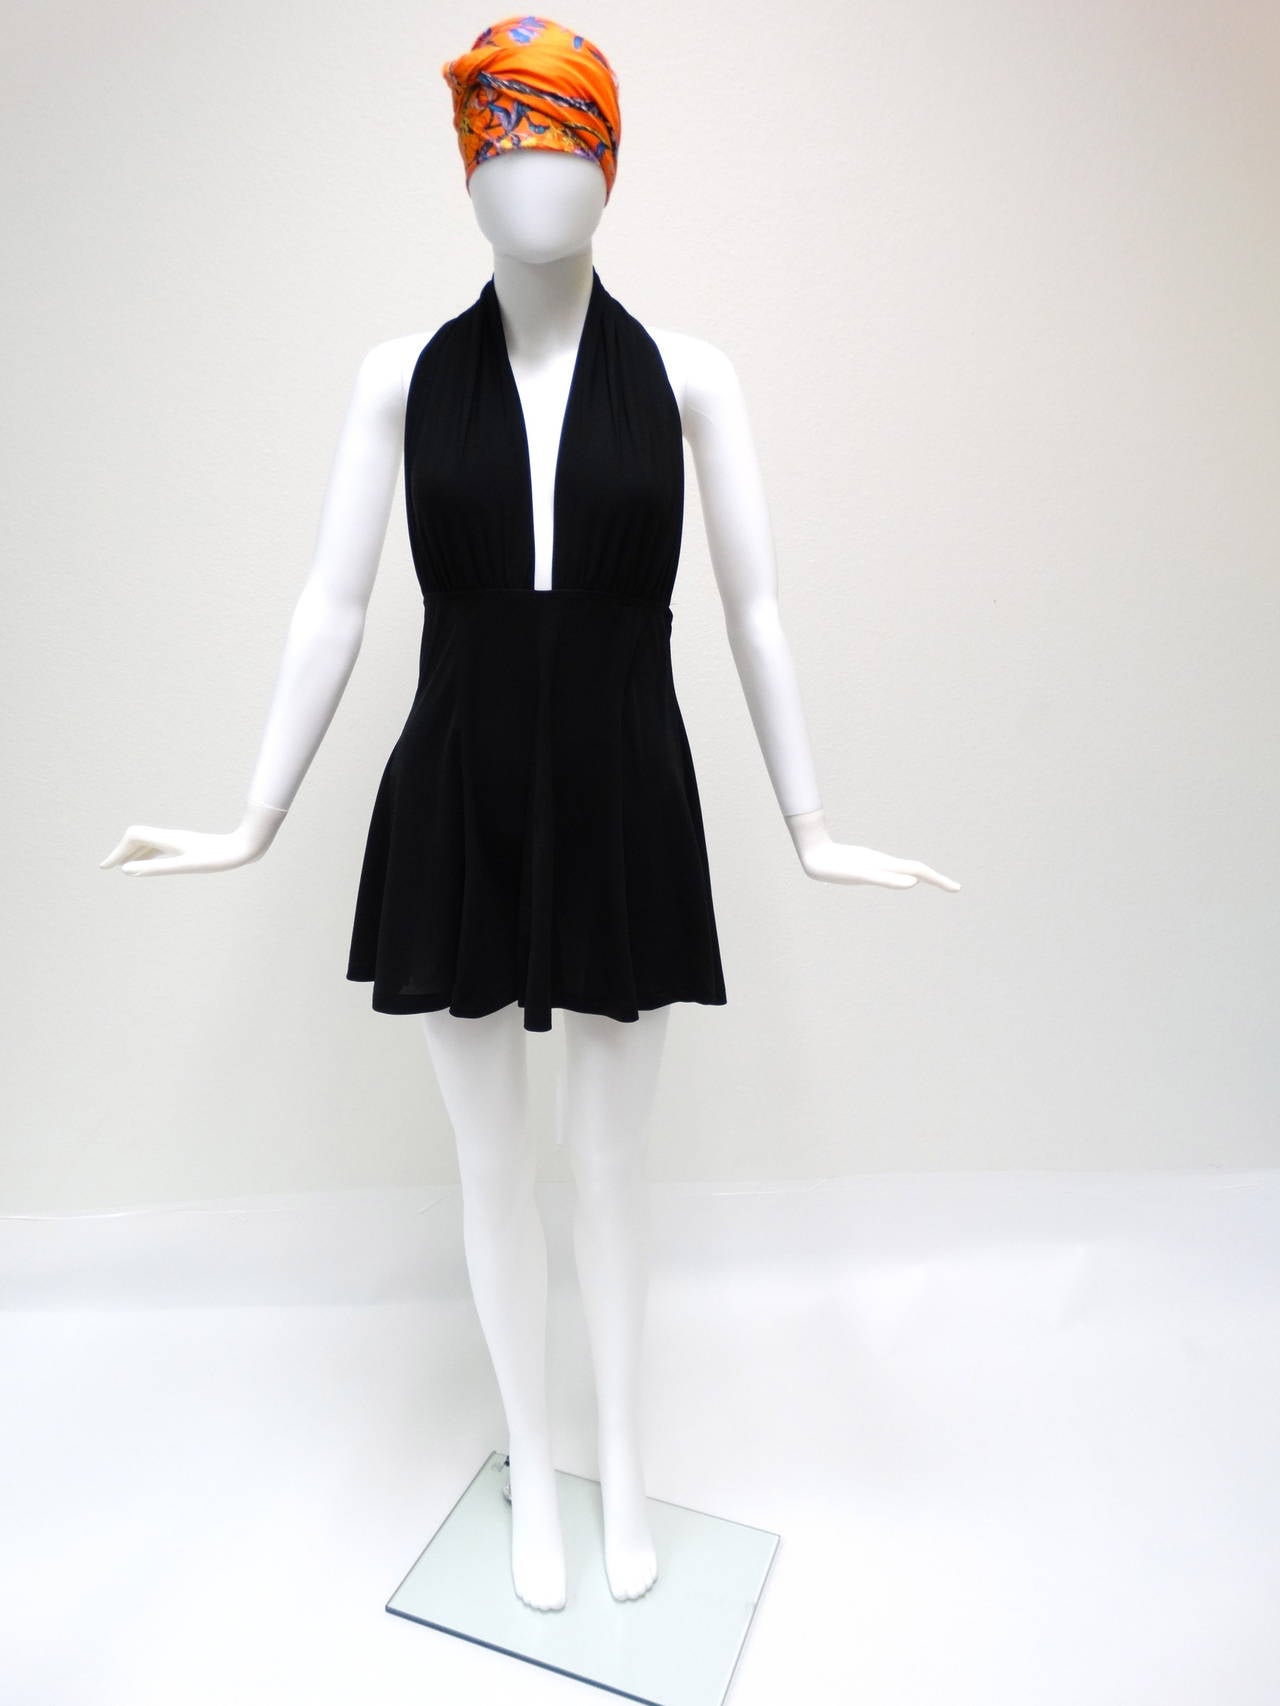 Have a Marilyn moment with this fabulous Norma Kamali halterneck mini dress with attached under bodysuit circa 1980s. Plunging V-neck, backless mini, slips on in jet black. Fabric is Spandex and Lycra marked sz large…Fits a modern sz 6 or 8